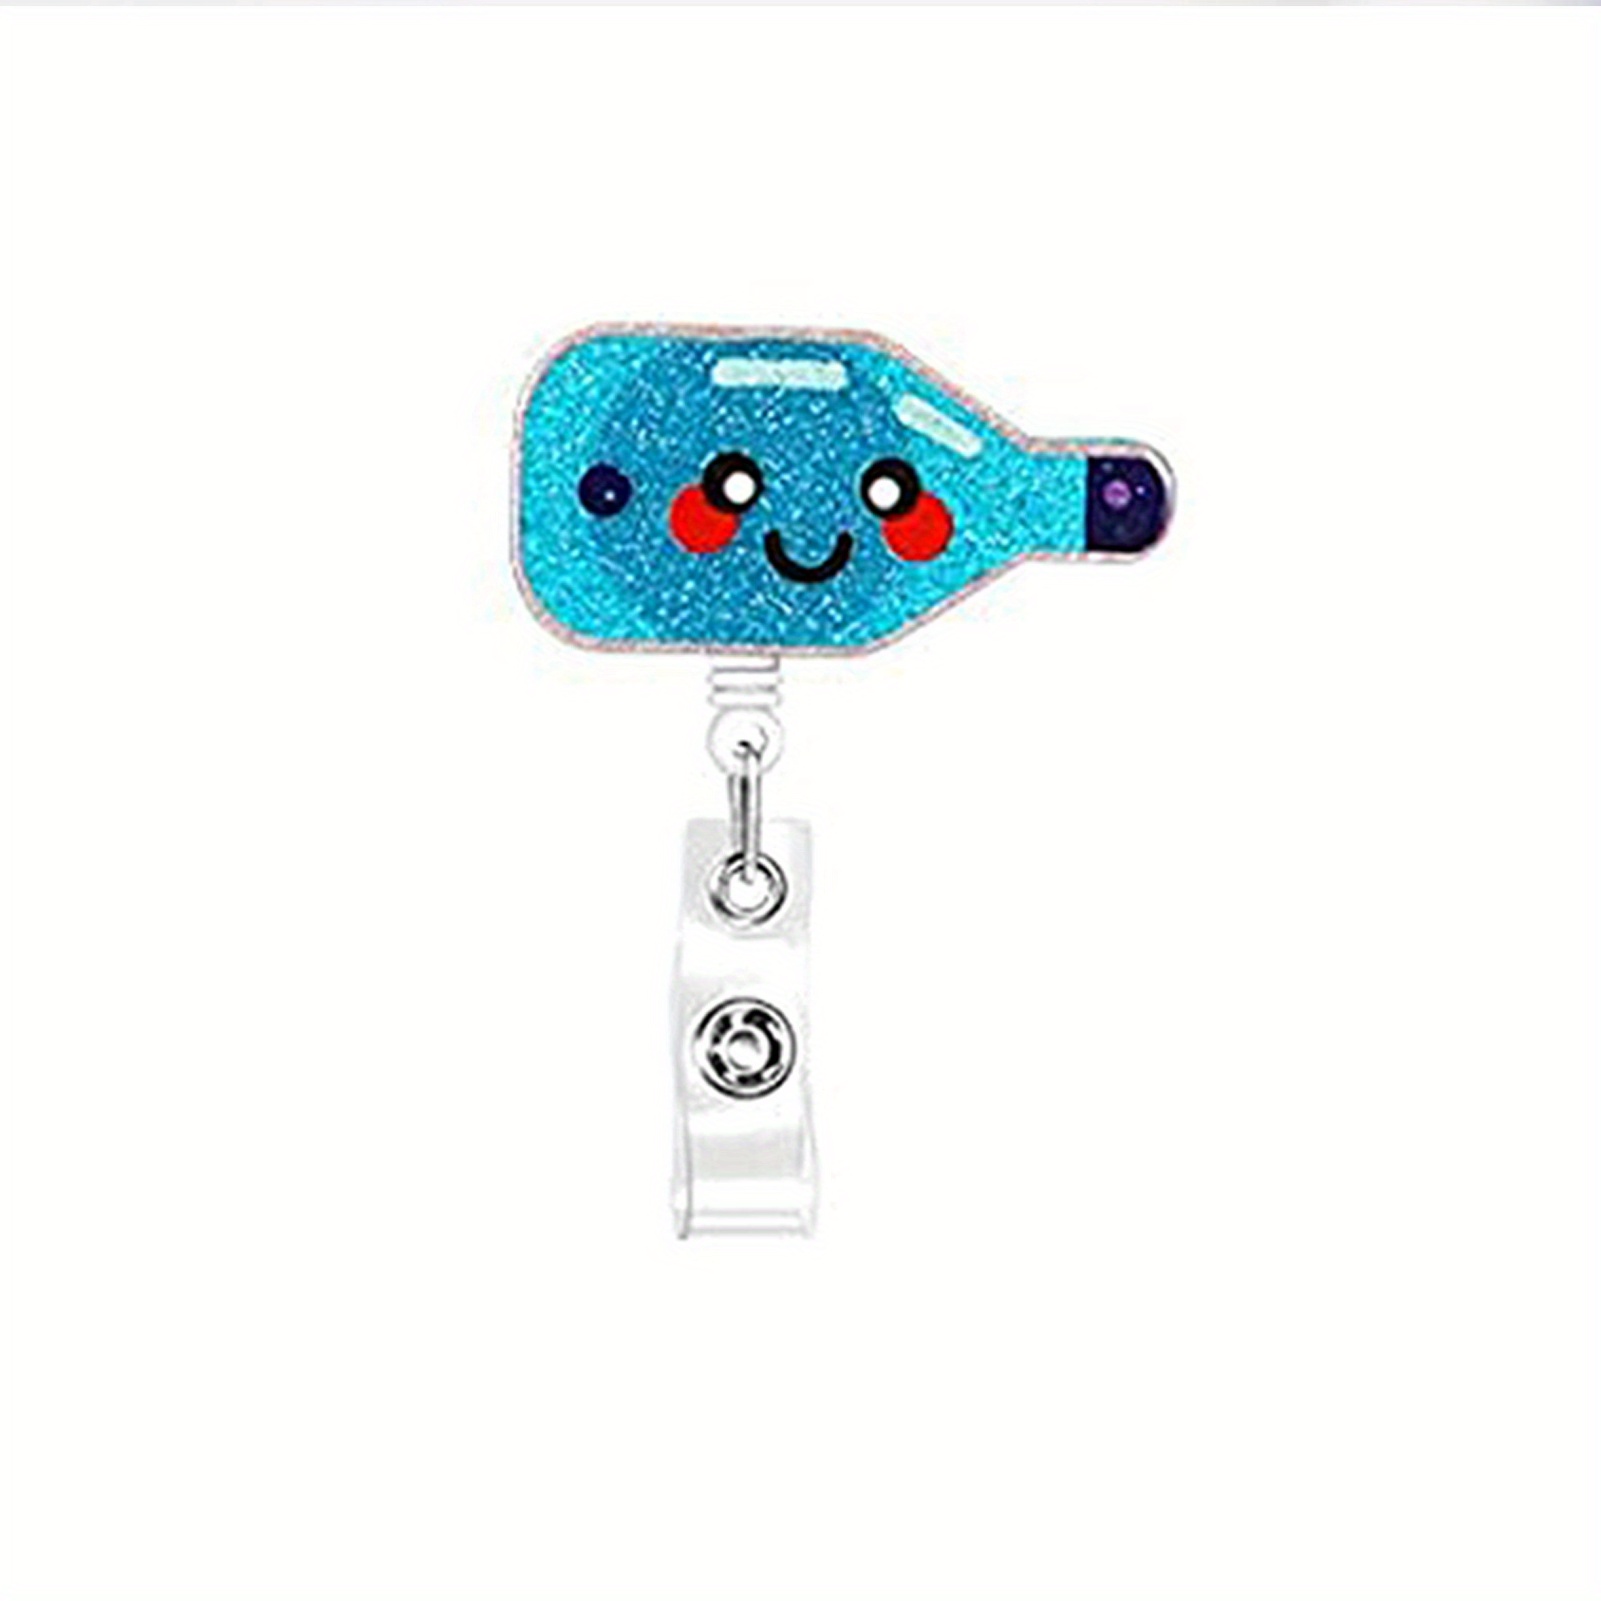 1pc Sparkly Acrylic Badge Reel For Holding Office Id Card, Student